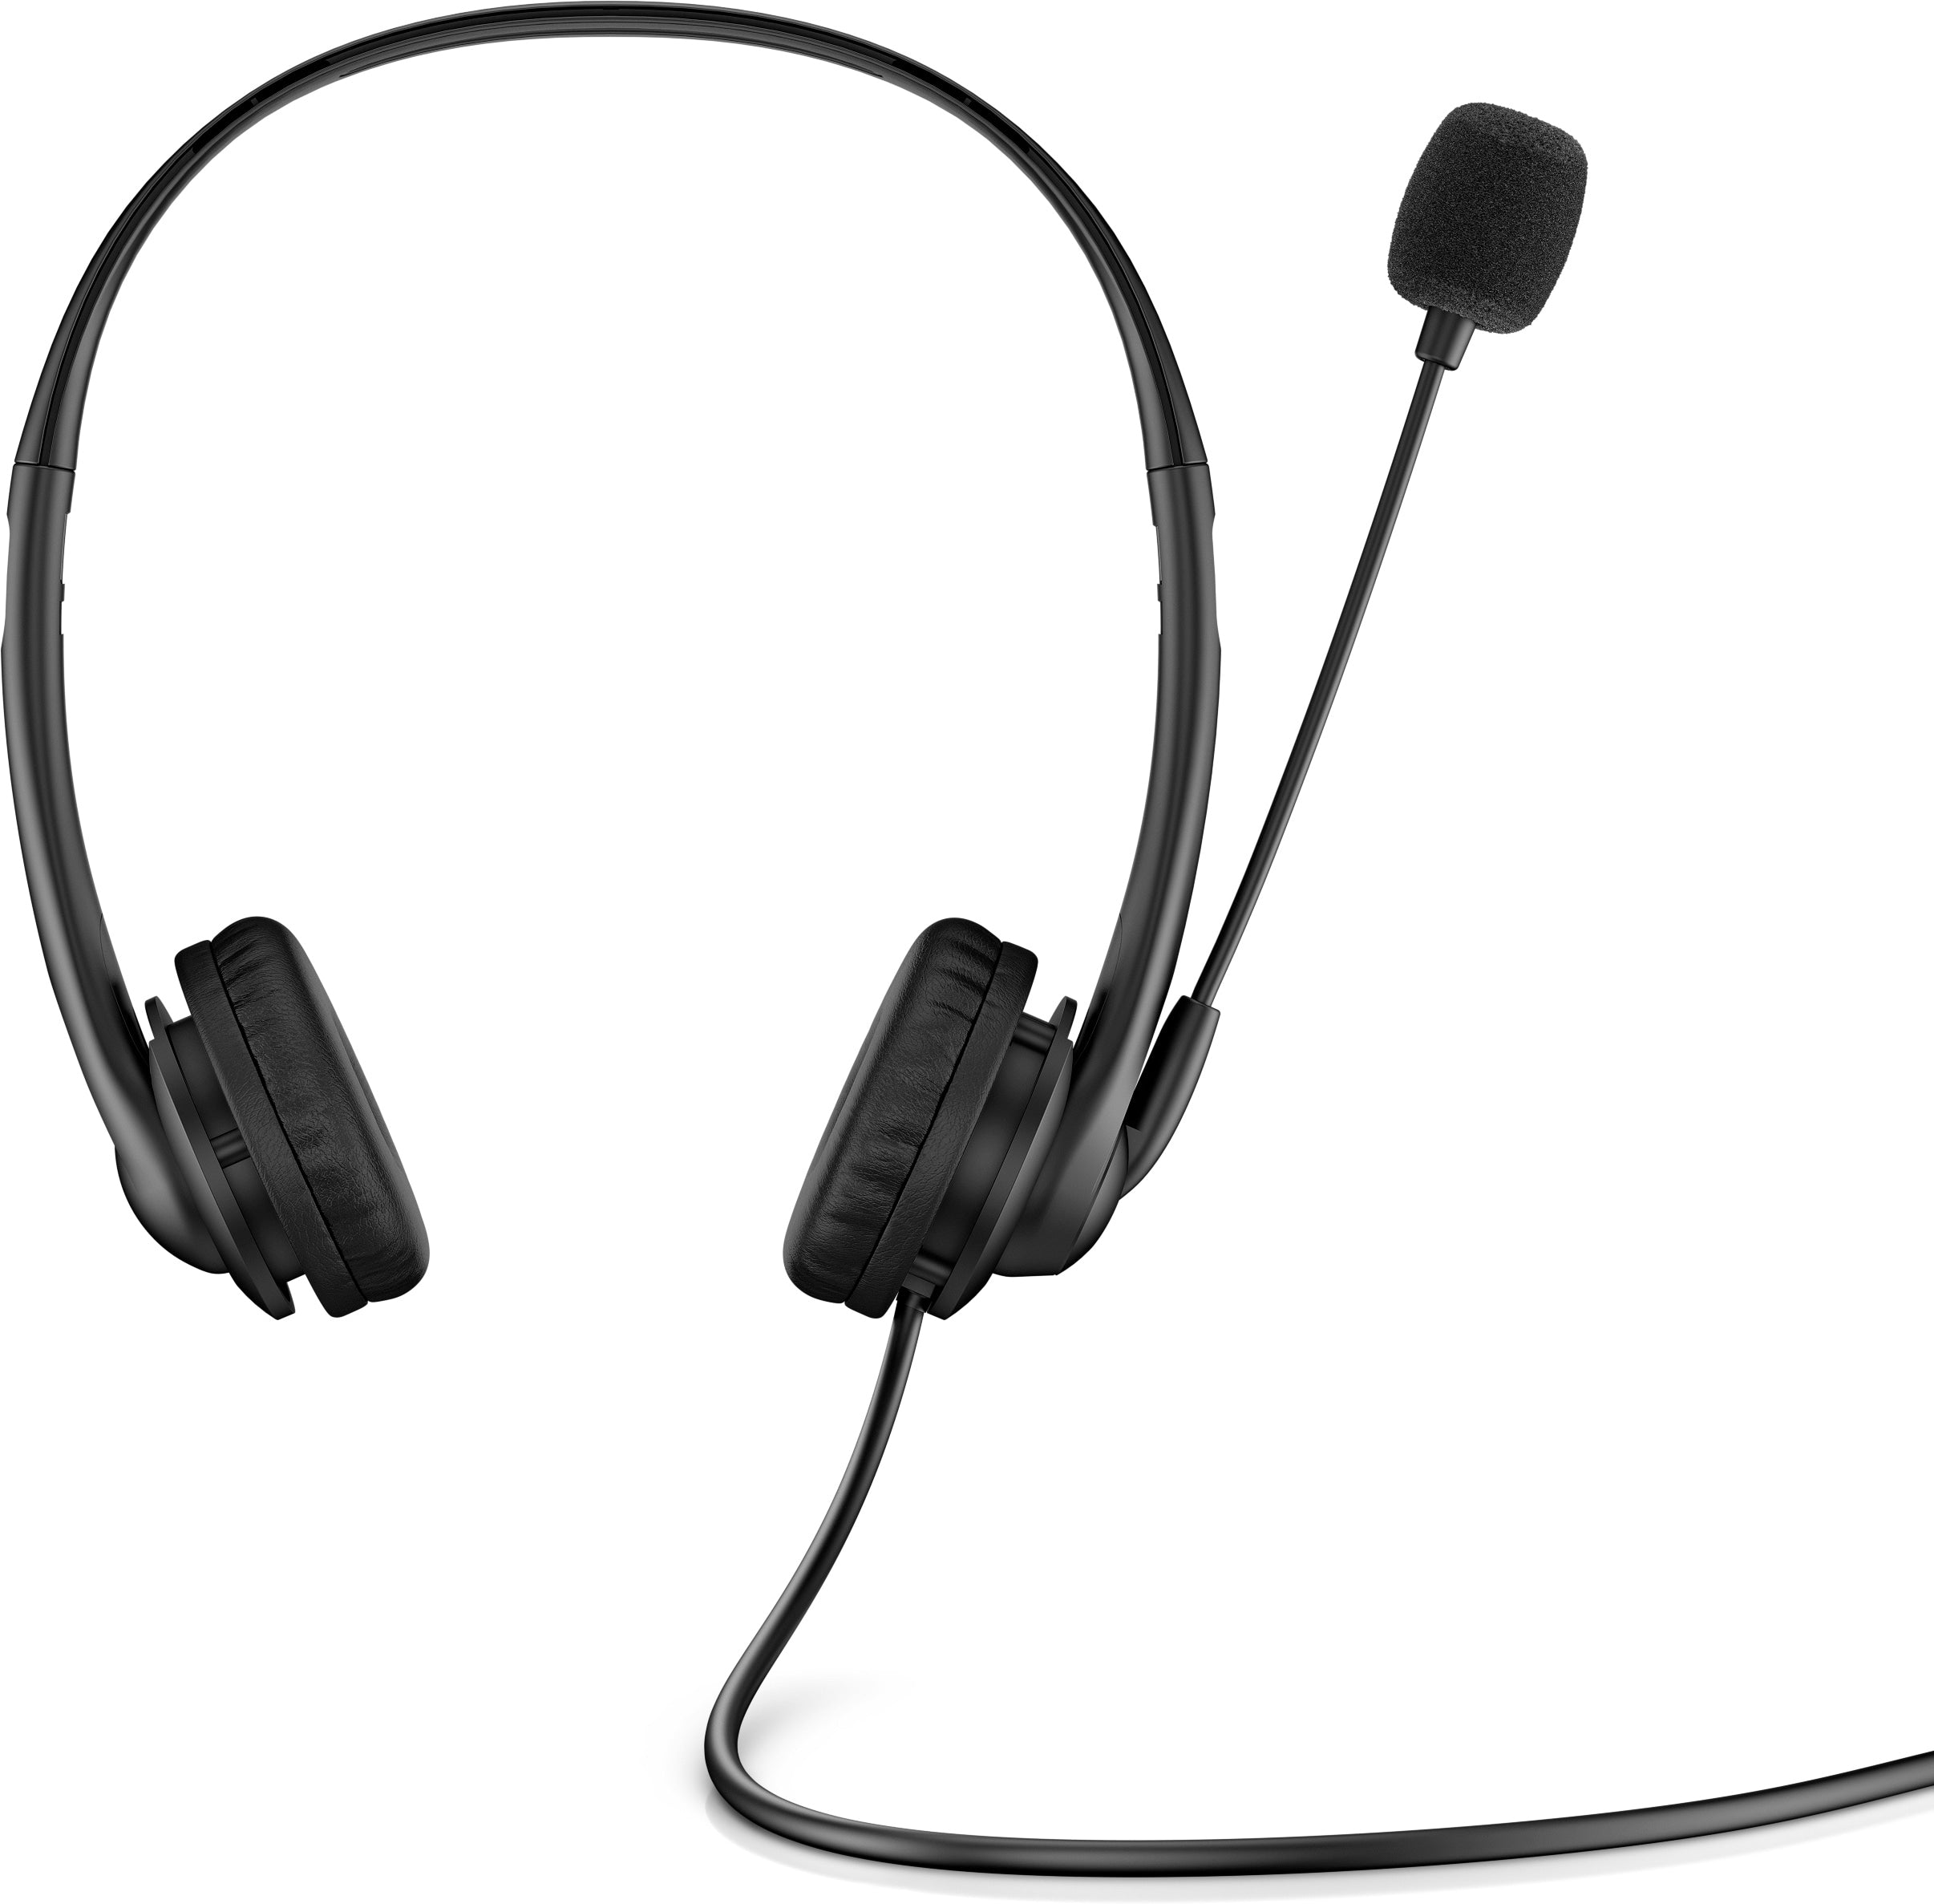 Auriculares 3.5 Mm Estéreo Hp G2 Negro